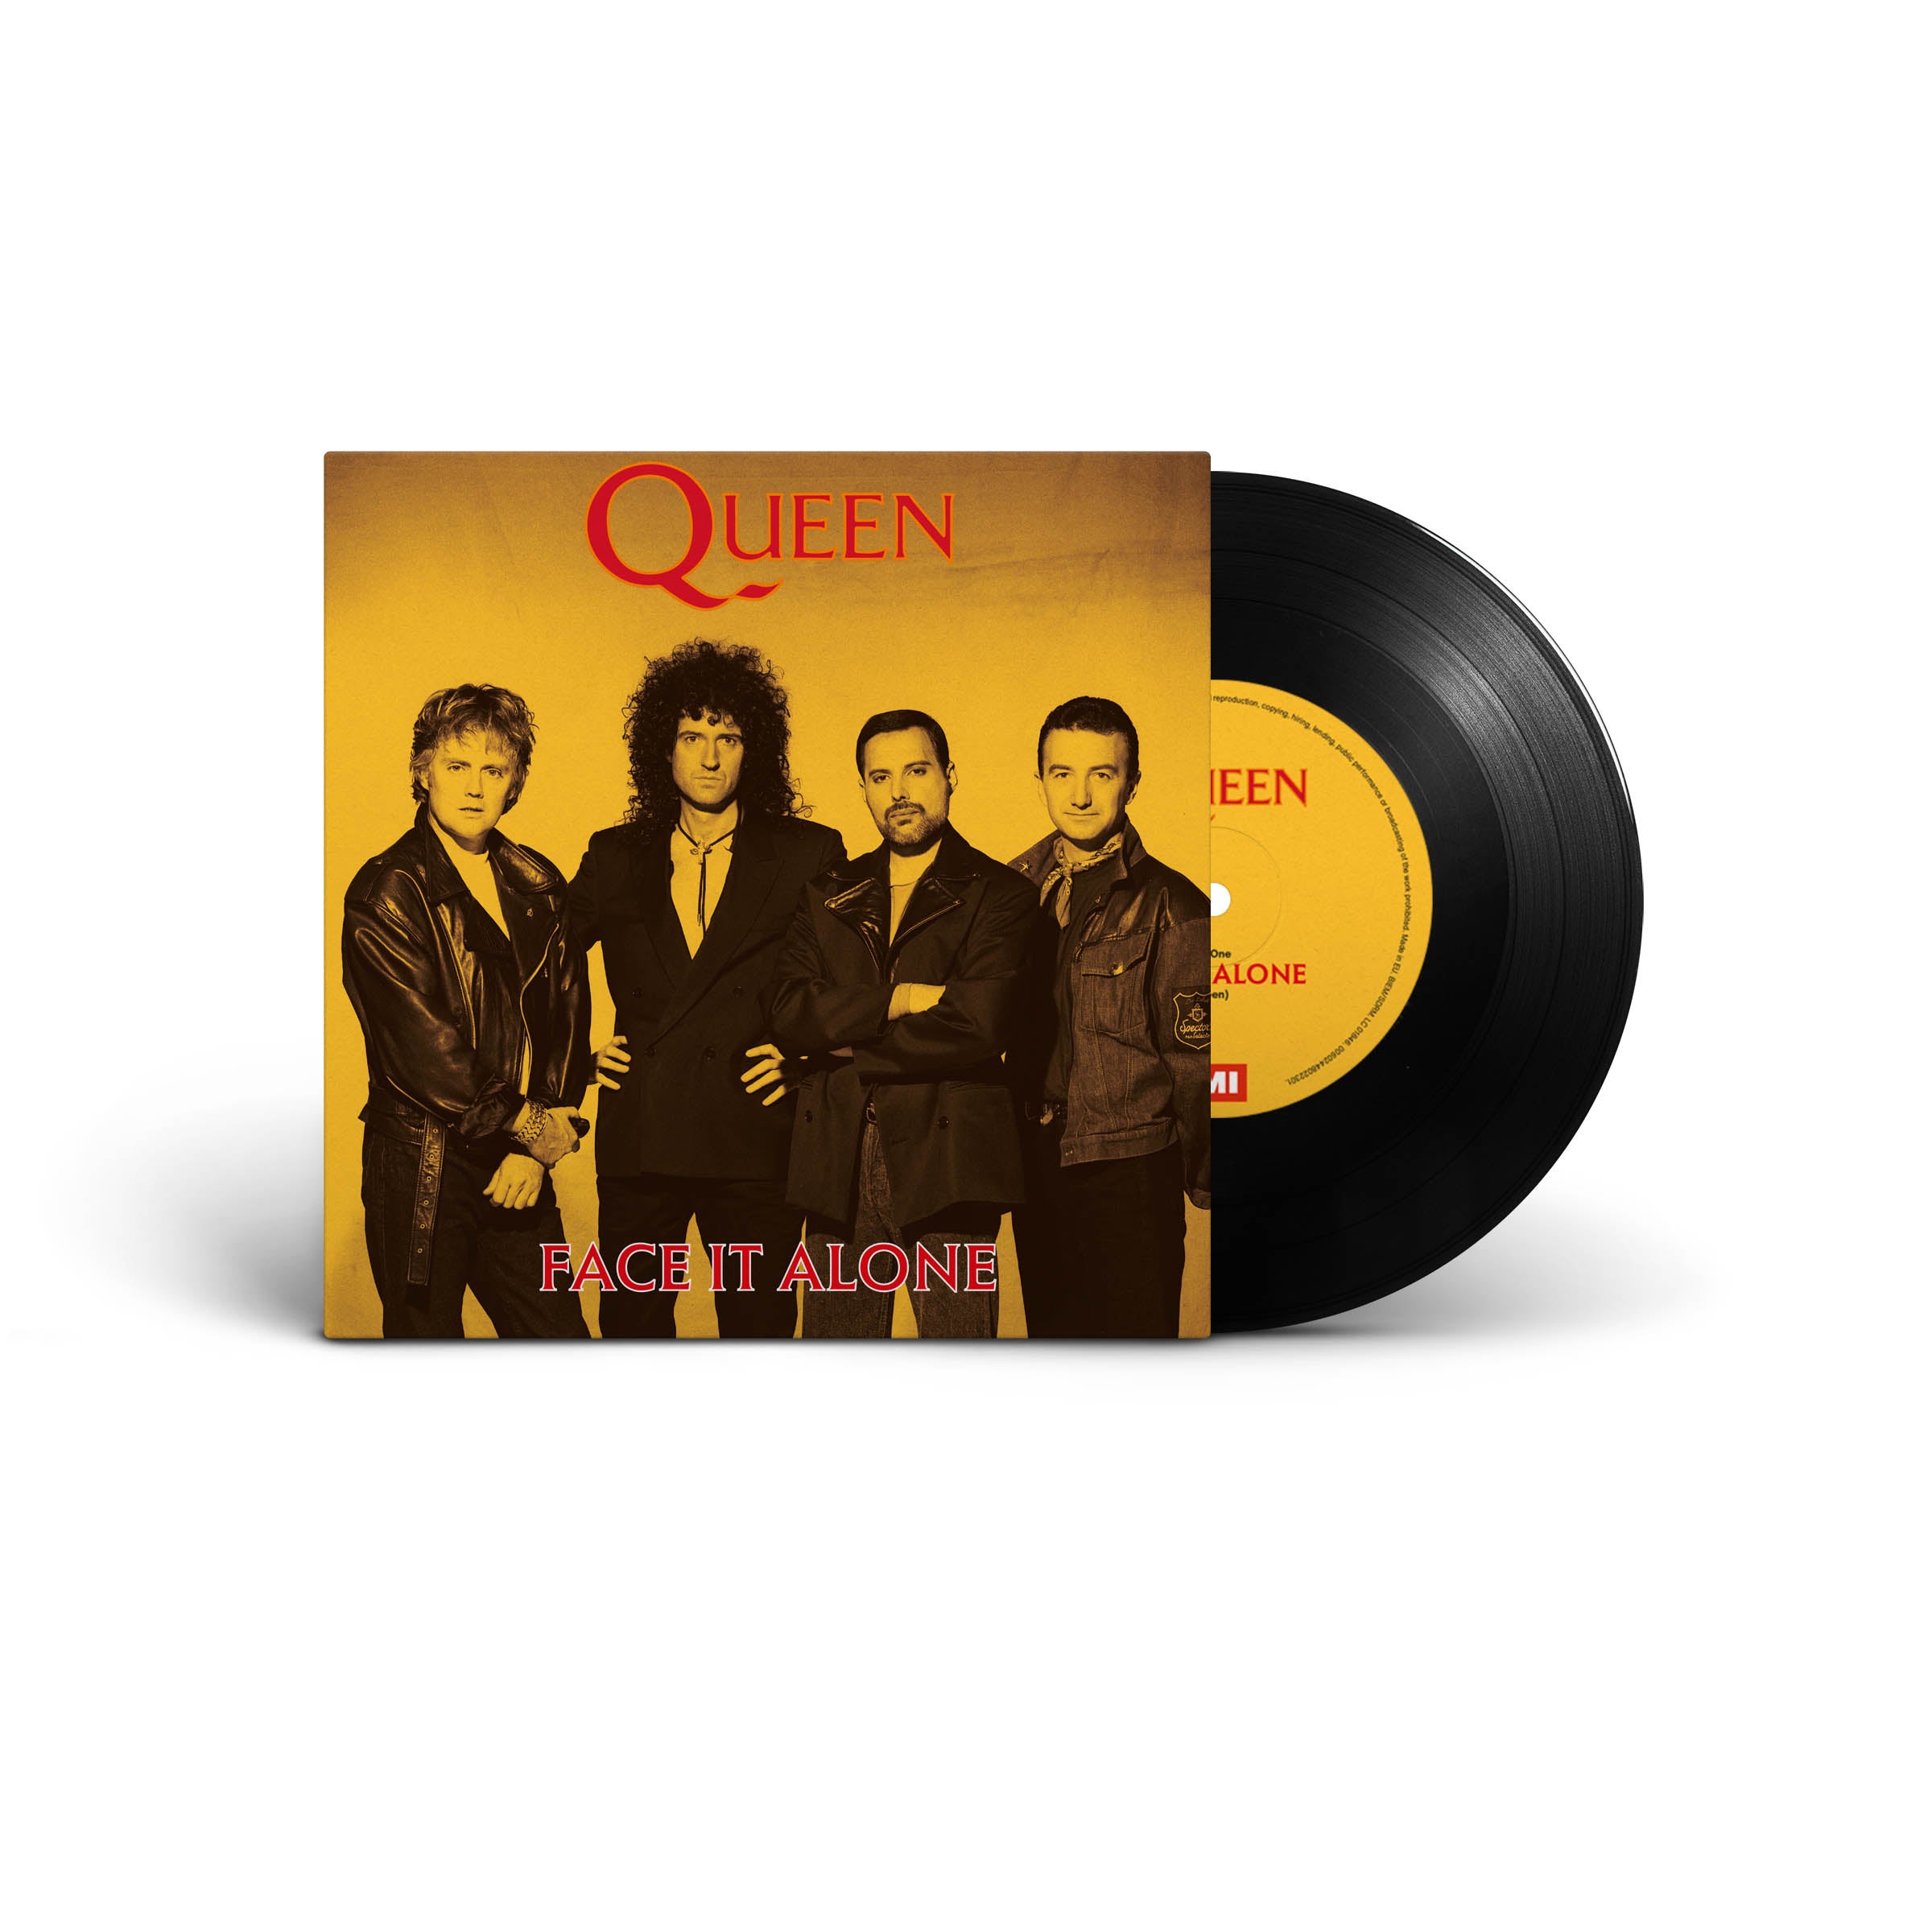 Queen release lost song Face It Alone - recorded with Freddie